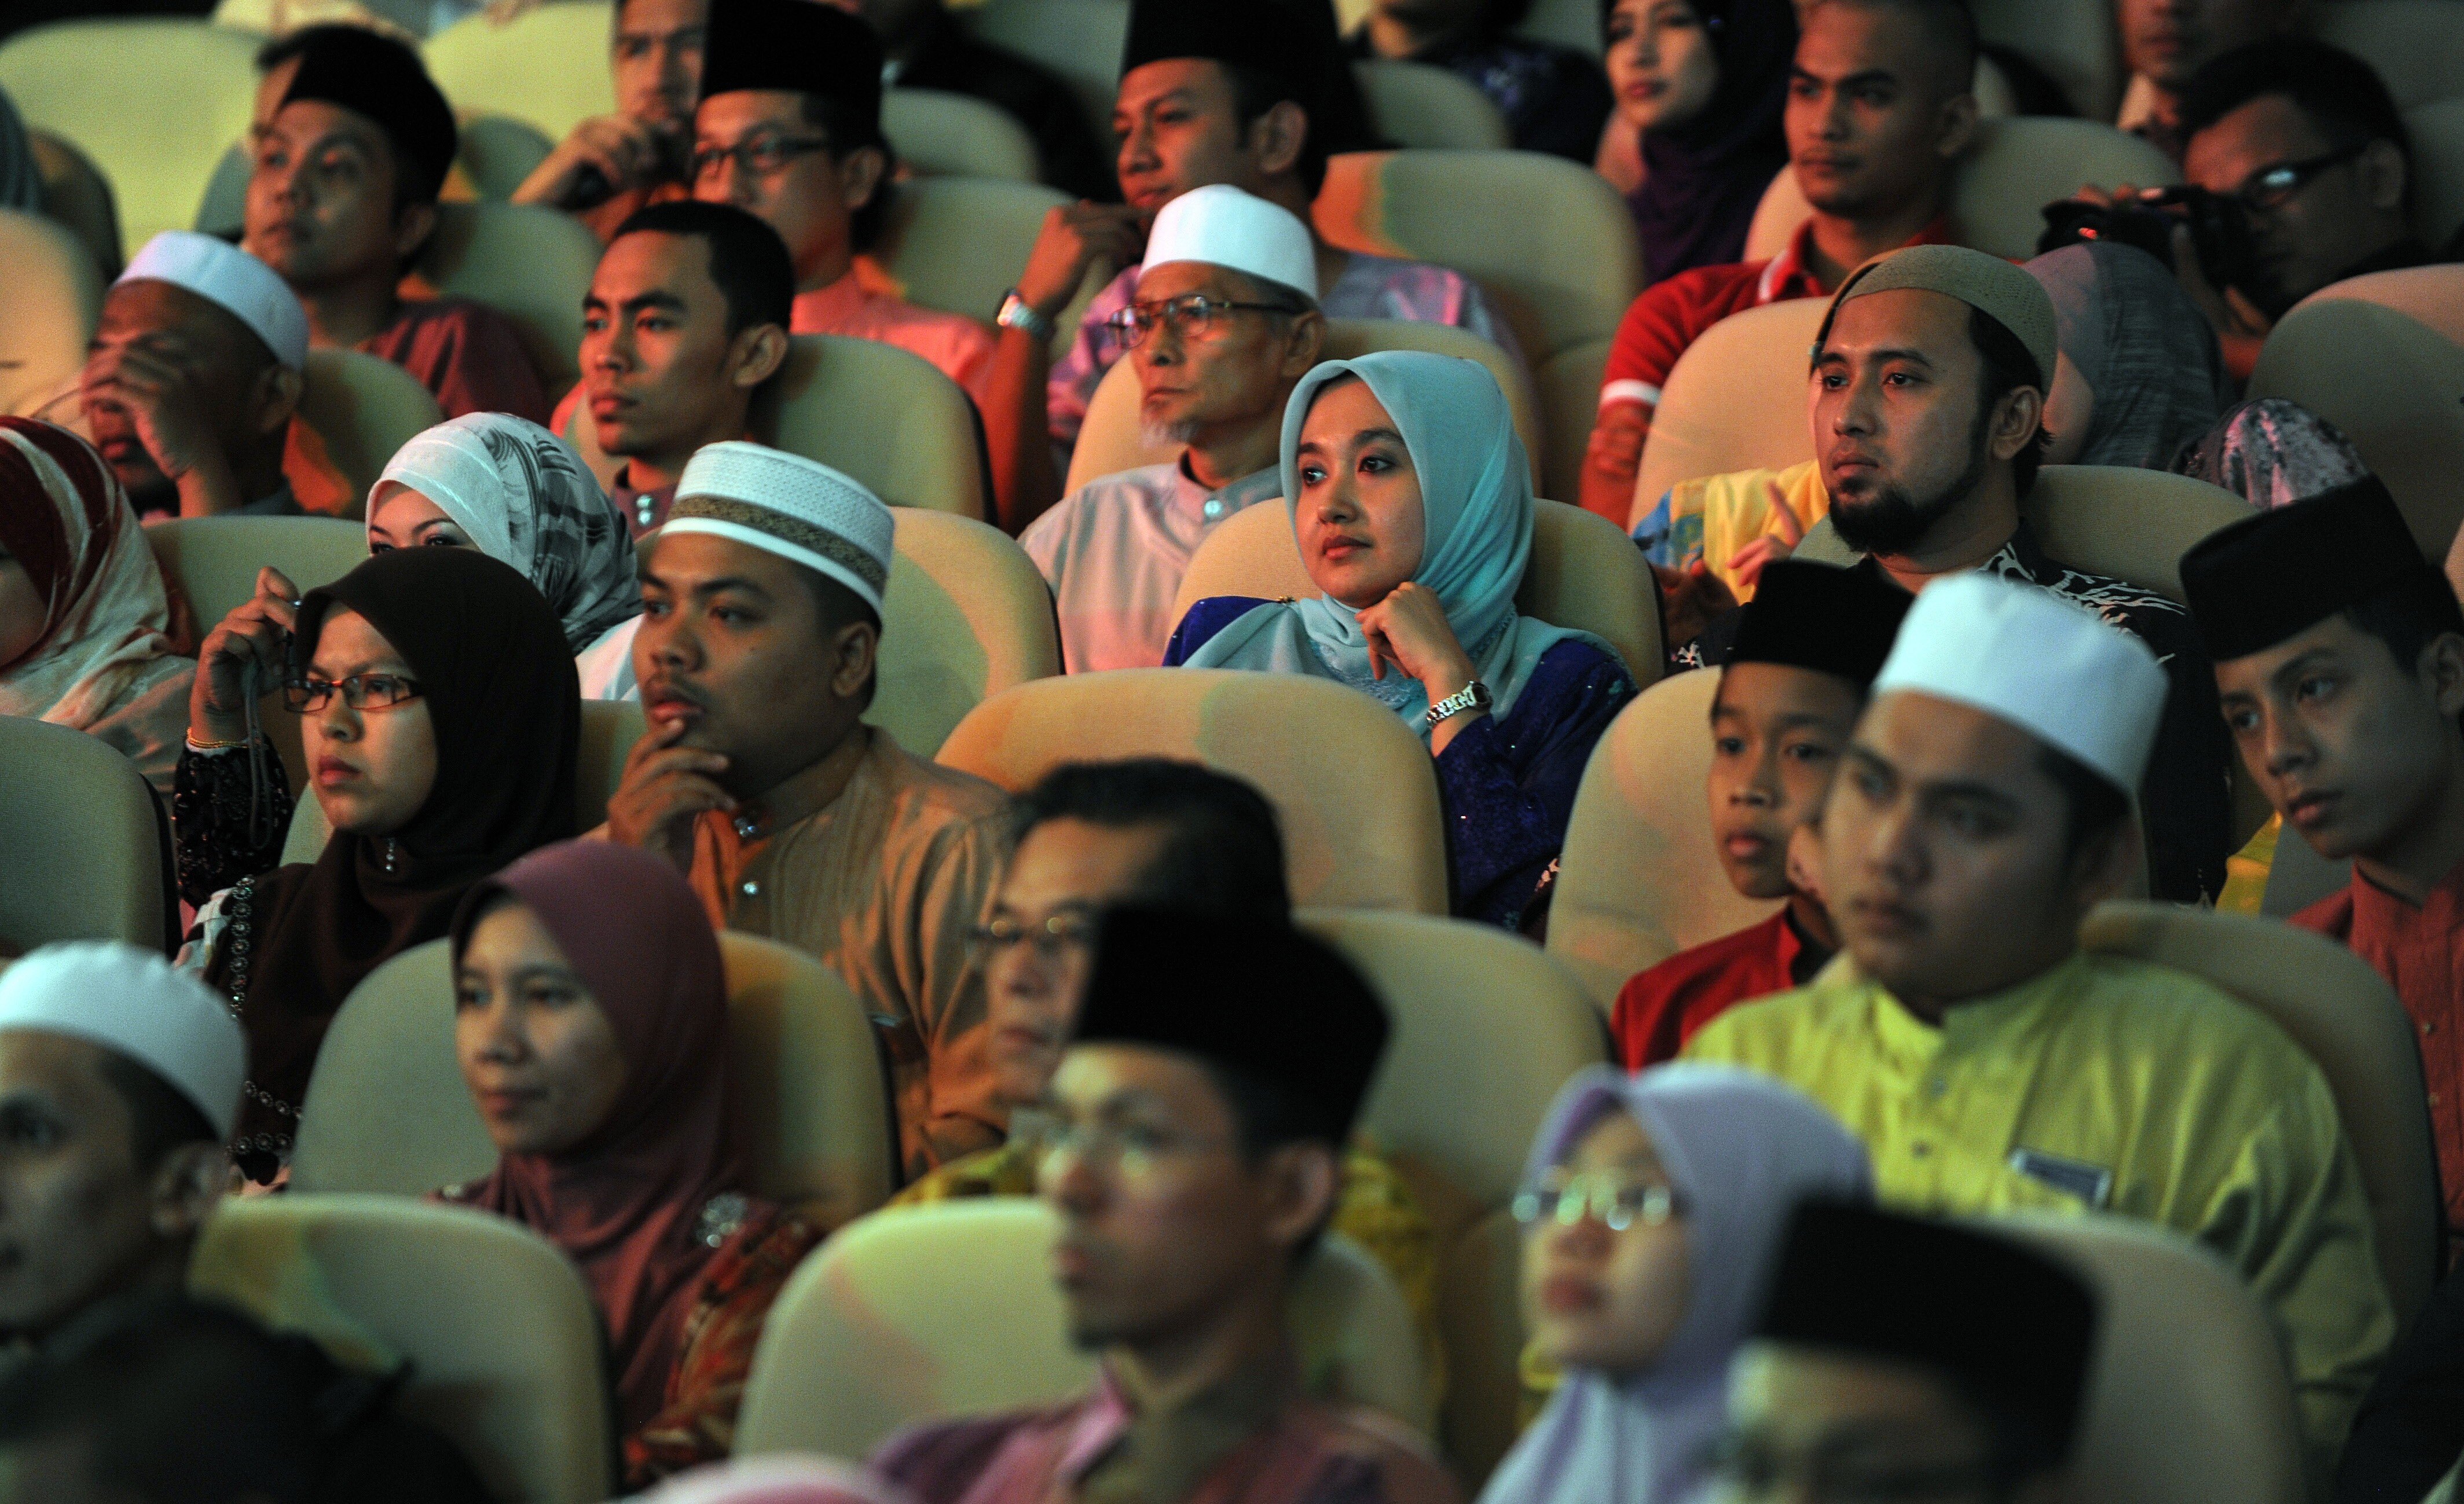 An audience watches a live performance of the Malaysian reality TV competition ‘Young Imam’ in Kuala Lumpur. Photo: AFP